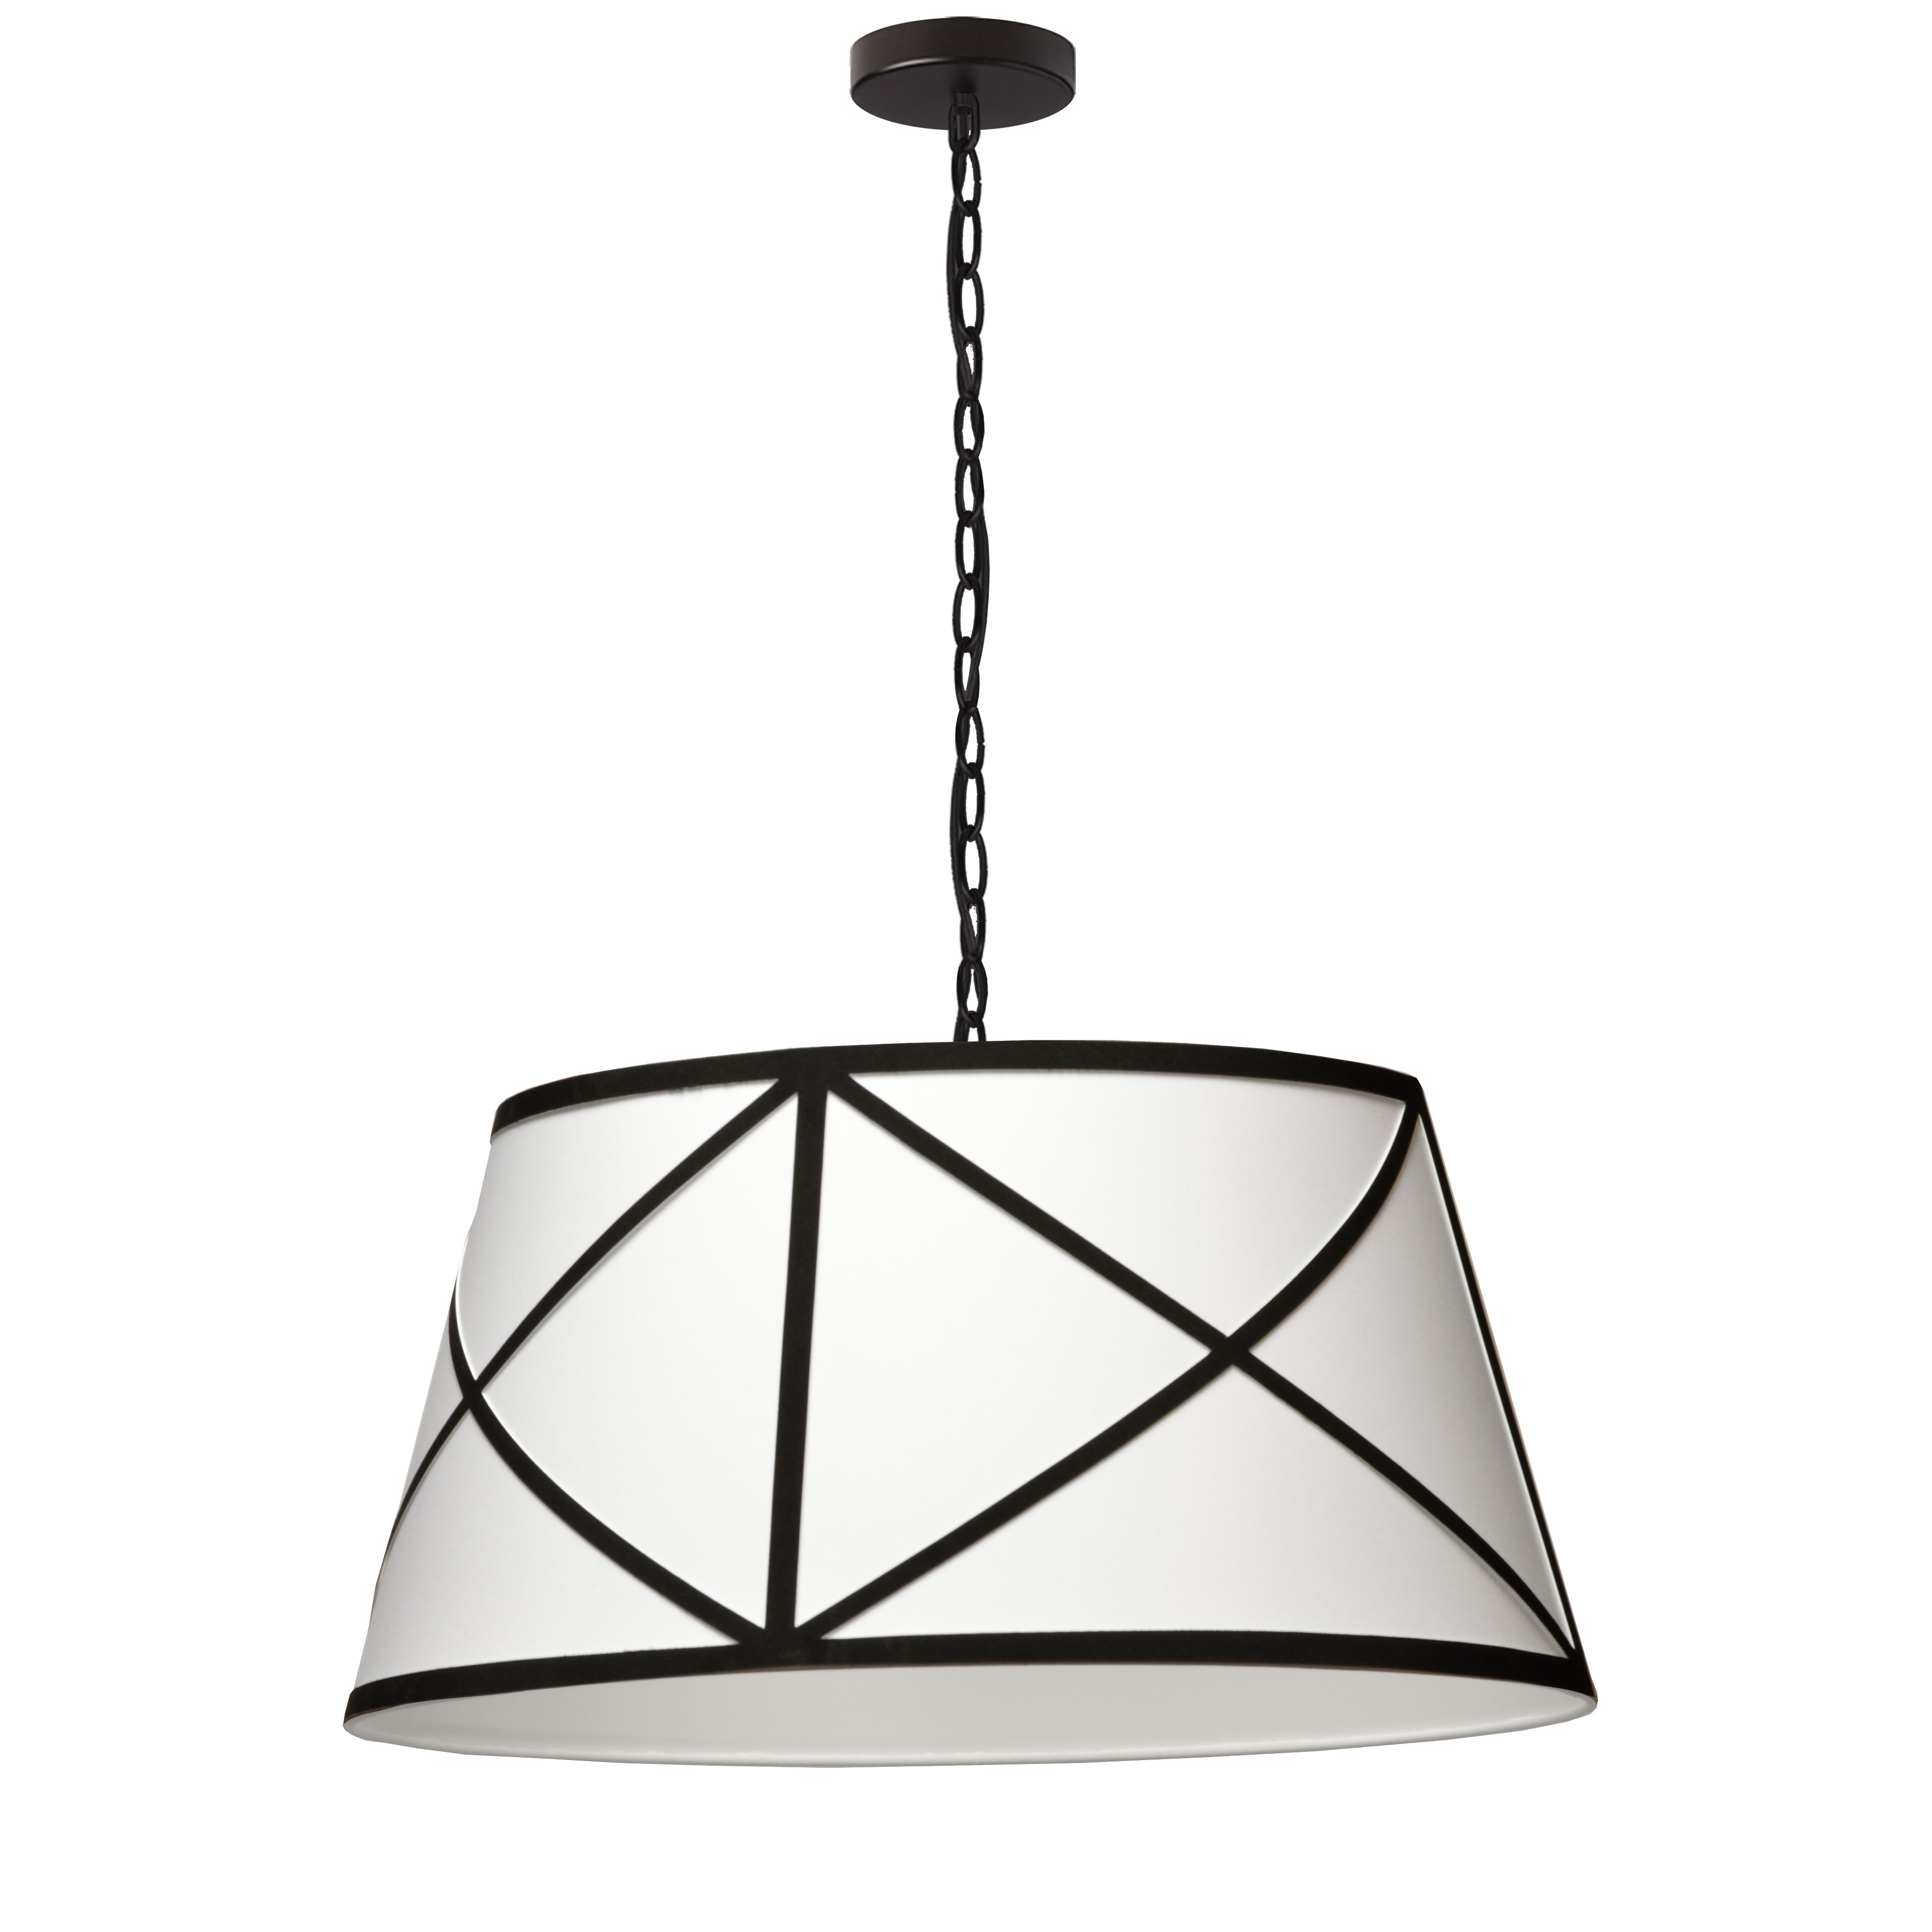 The Parker family of lighting has a stylish silhouette, and details that are reminiscent of stately mid-century furnishings. Clean modern lines give it a versatile transitional design that blends with a variety of styles and décor schemes. A classic chain drops to an inverted tapered drum fabric shade, with a metal canopy and frame crafted in an elegant linear design. The look can be modified by your choice of metallic finish and contrasting fabric shade. The effect is opulent, and with its range of sizes, Parker lighting adds a note of luxury to virtually any room in your home.